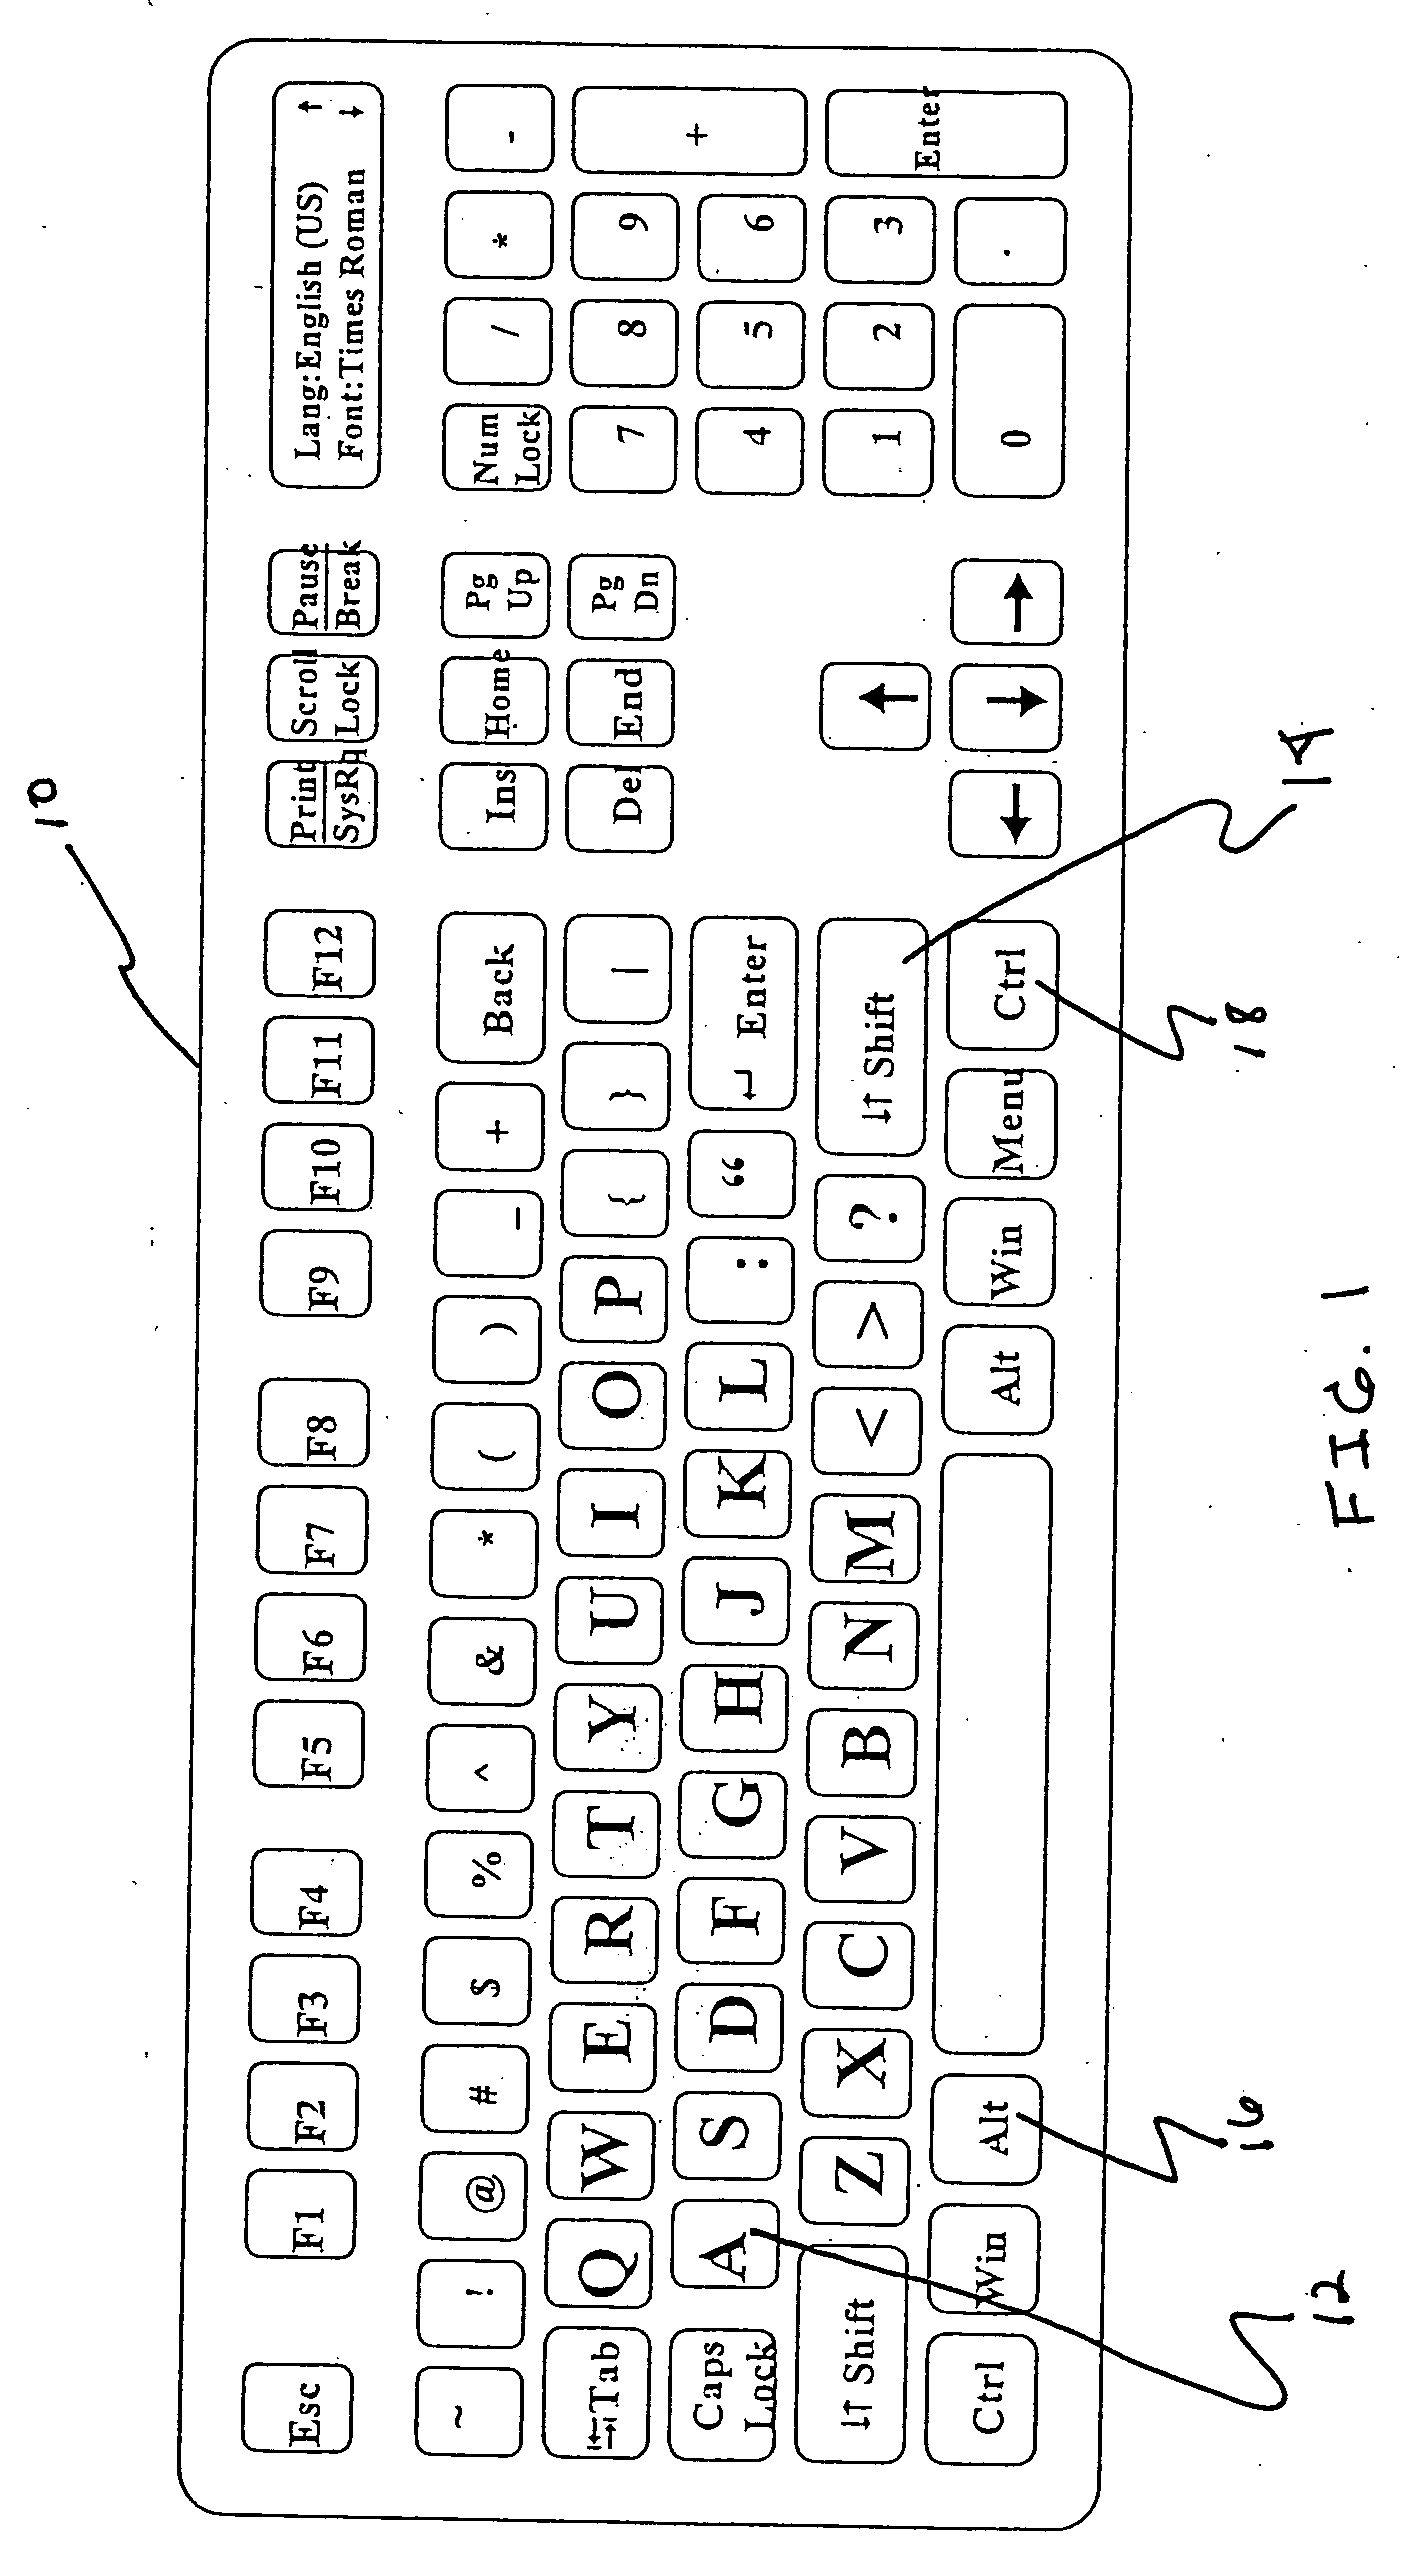 Dynamic character display input device